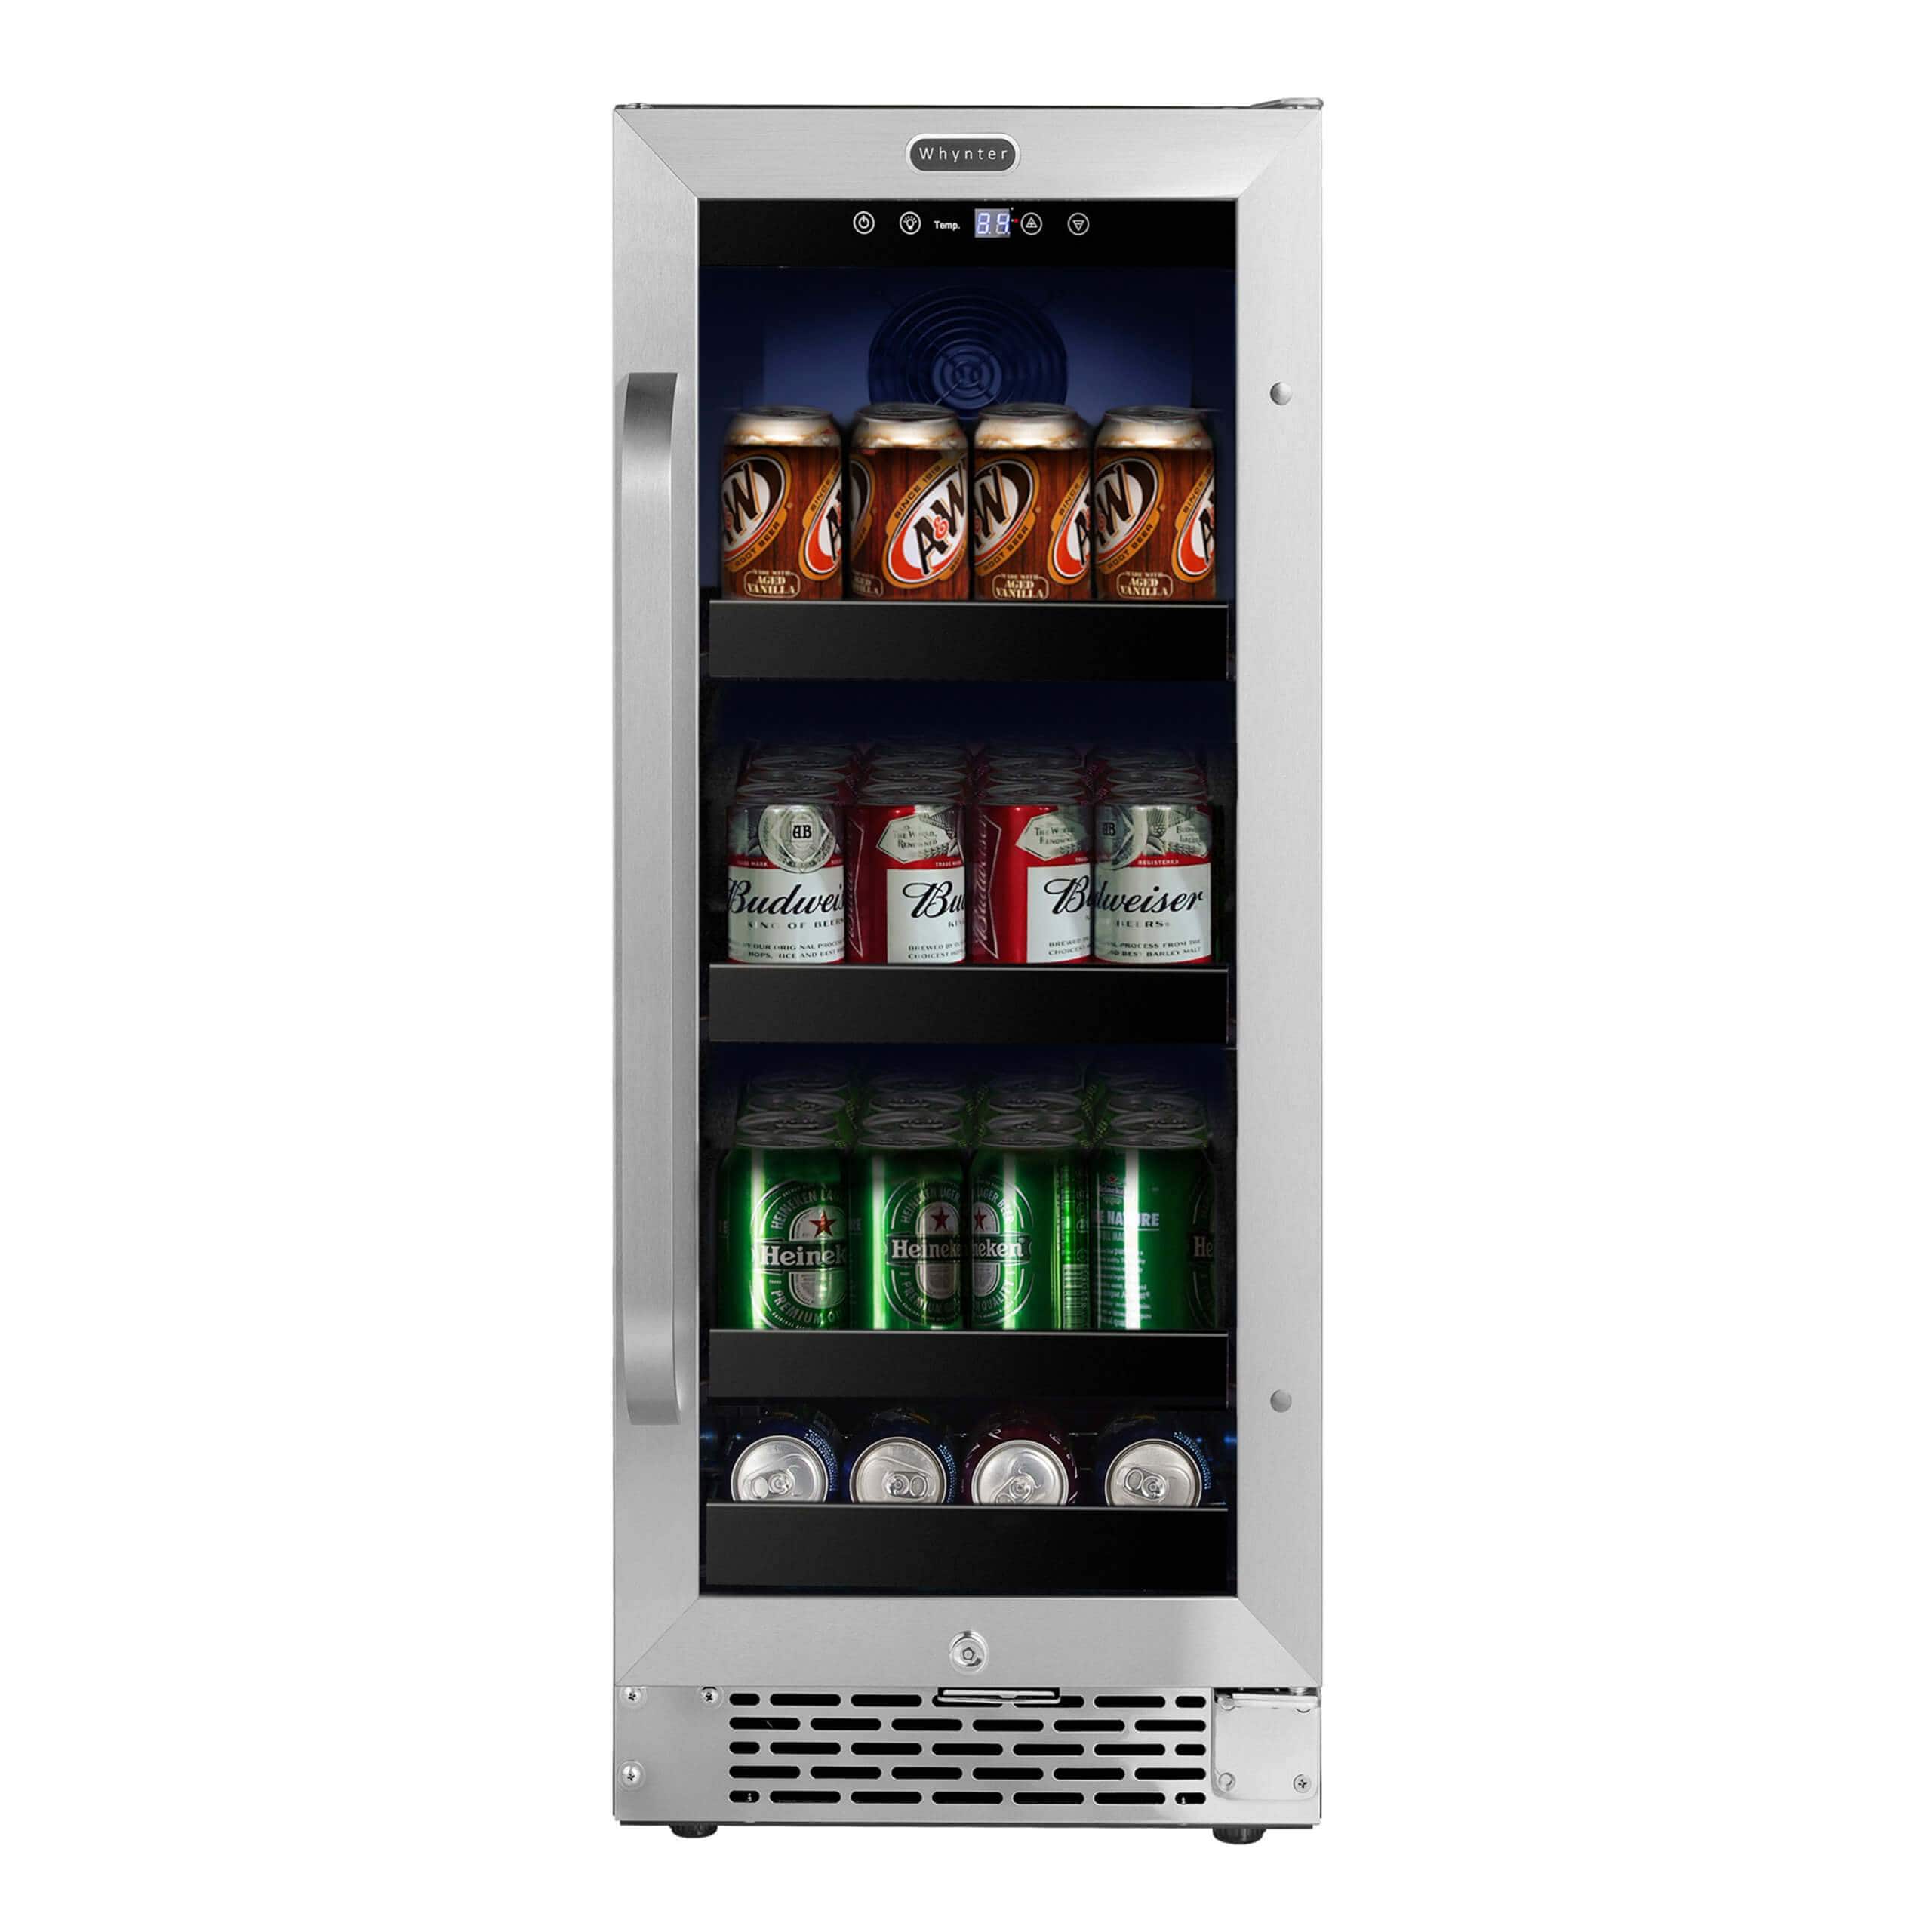 Whynter 15 inch Built-In 80 Can Undercounter Stainless Steel Beverage Refrigerator with Reversible Door BBR-838SB Wine Coolers Empire